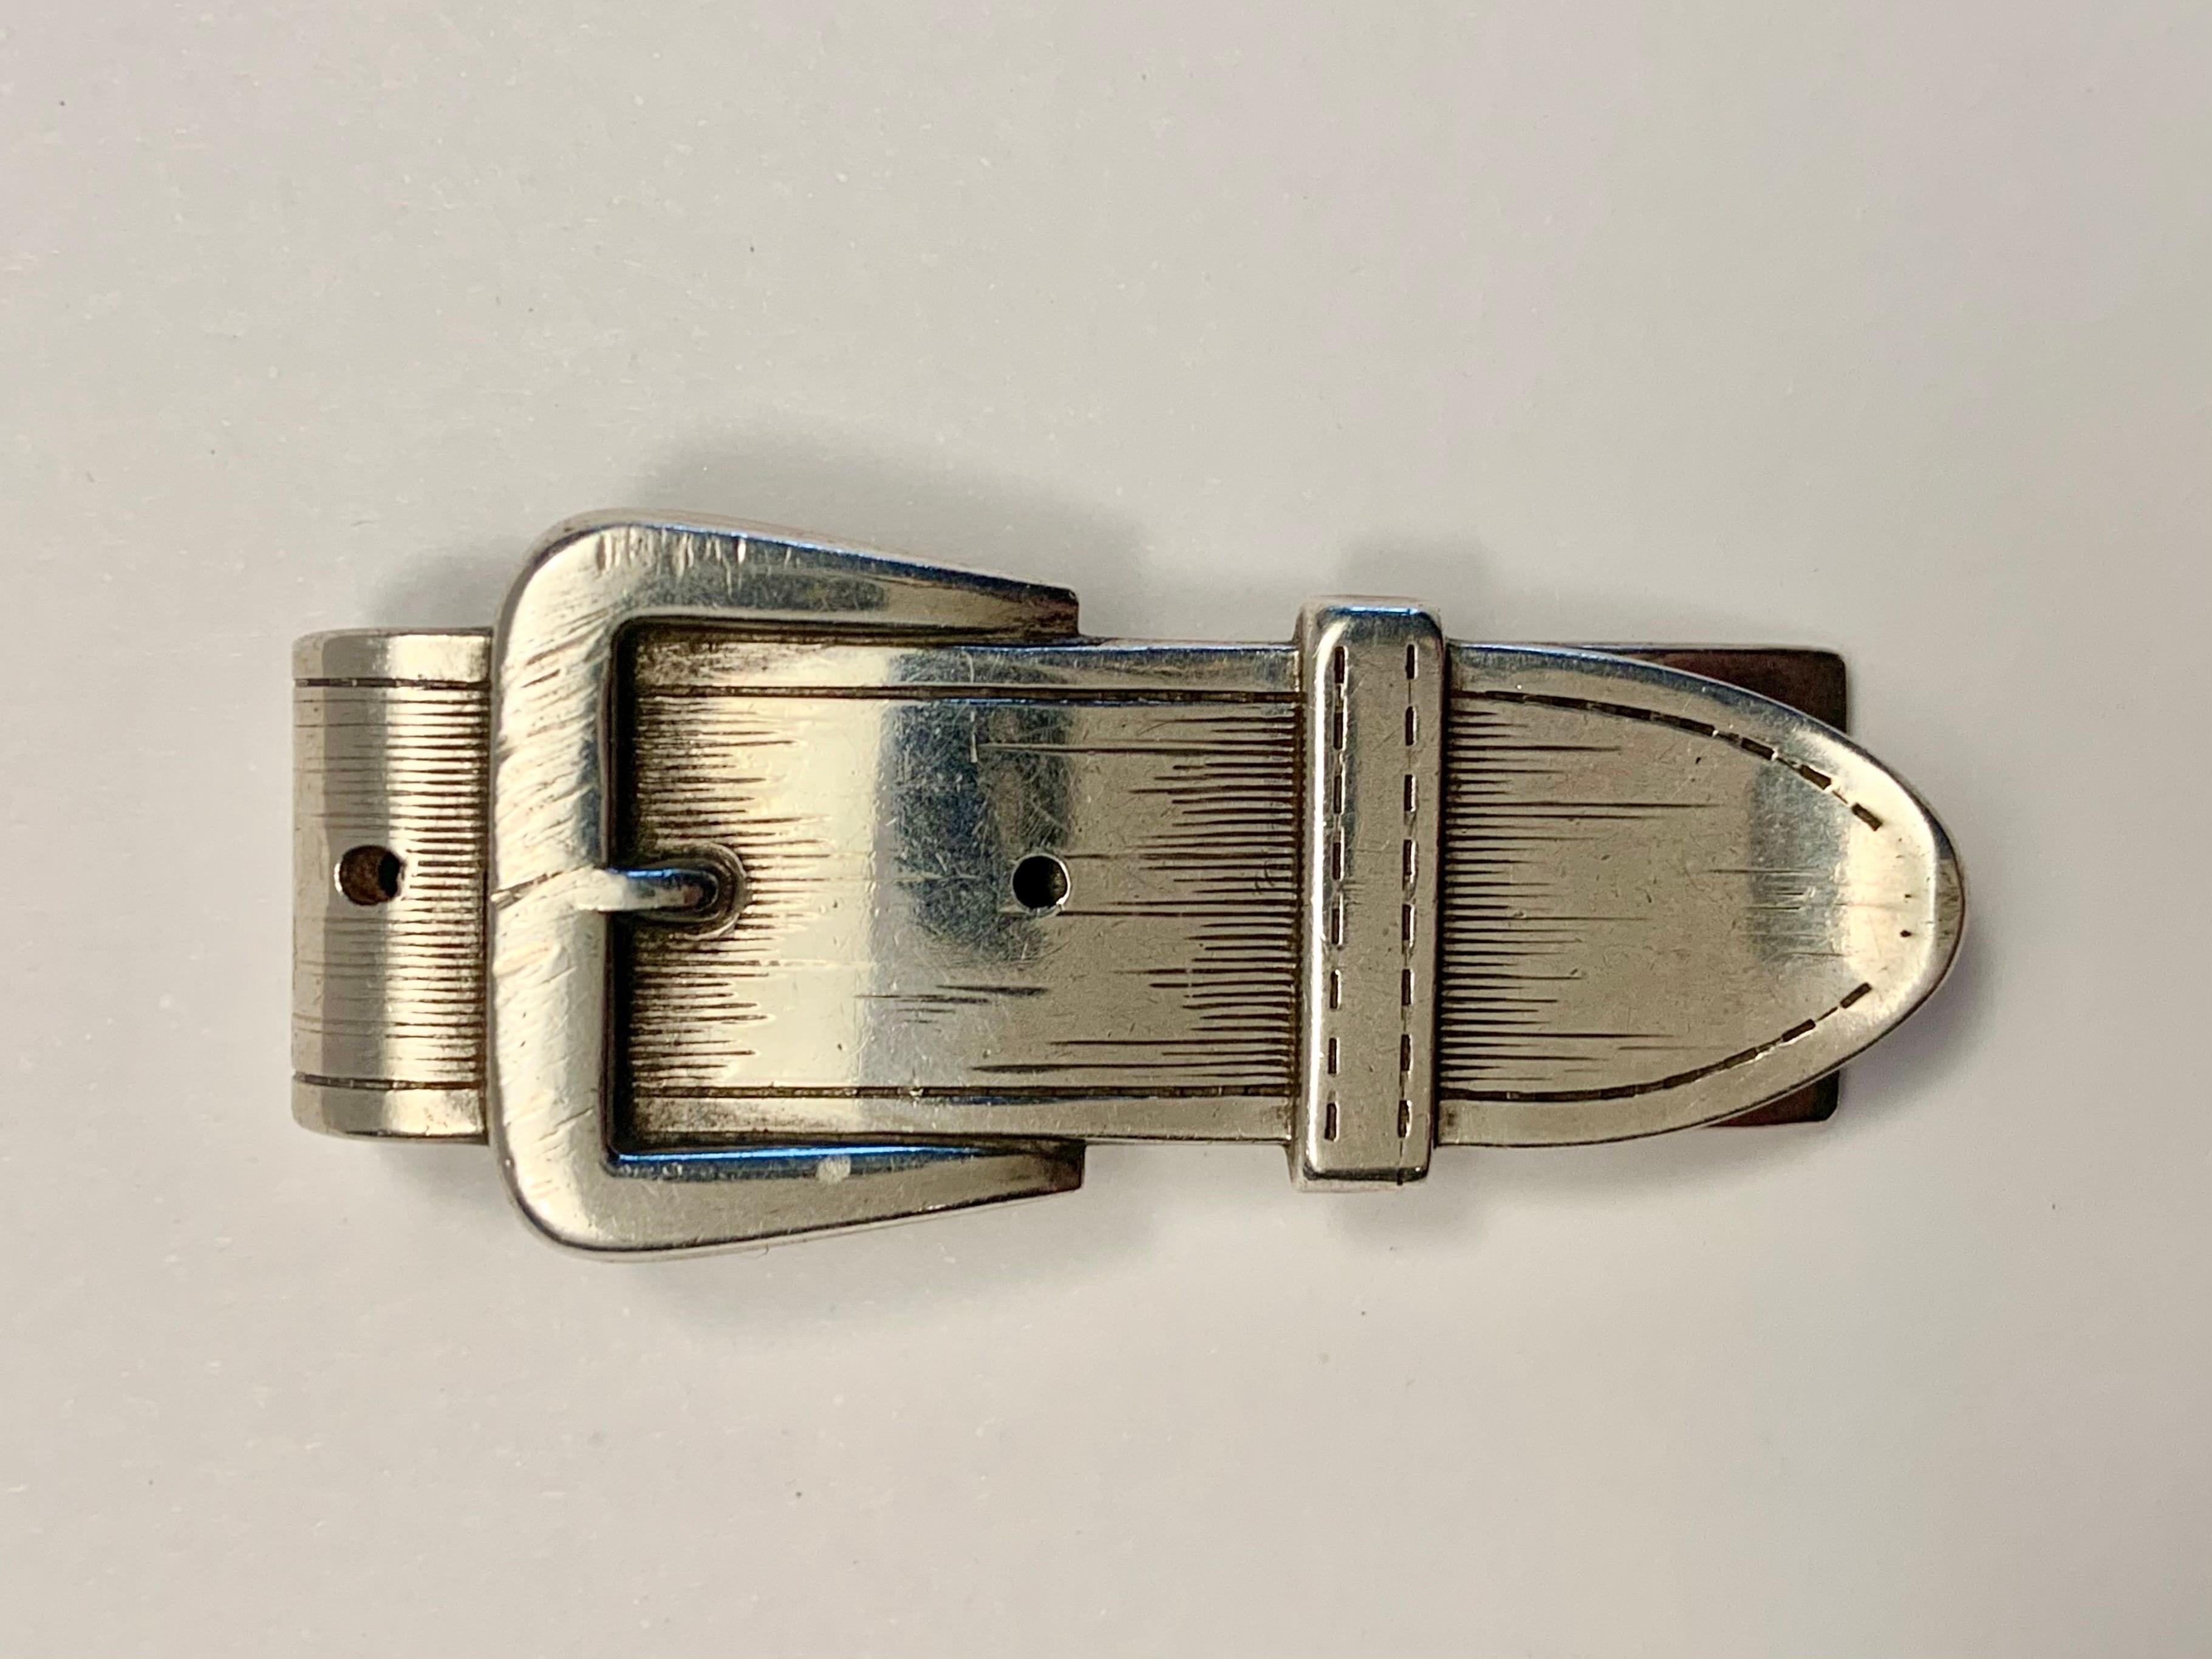 This mid Century sterling silver money clip is a nice alternative to a billfold.  it is designed to look like a belt and buckle, complete with a 